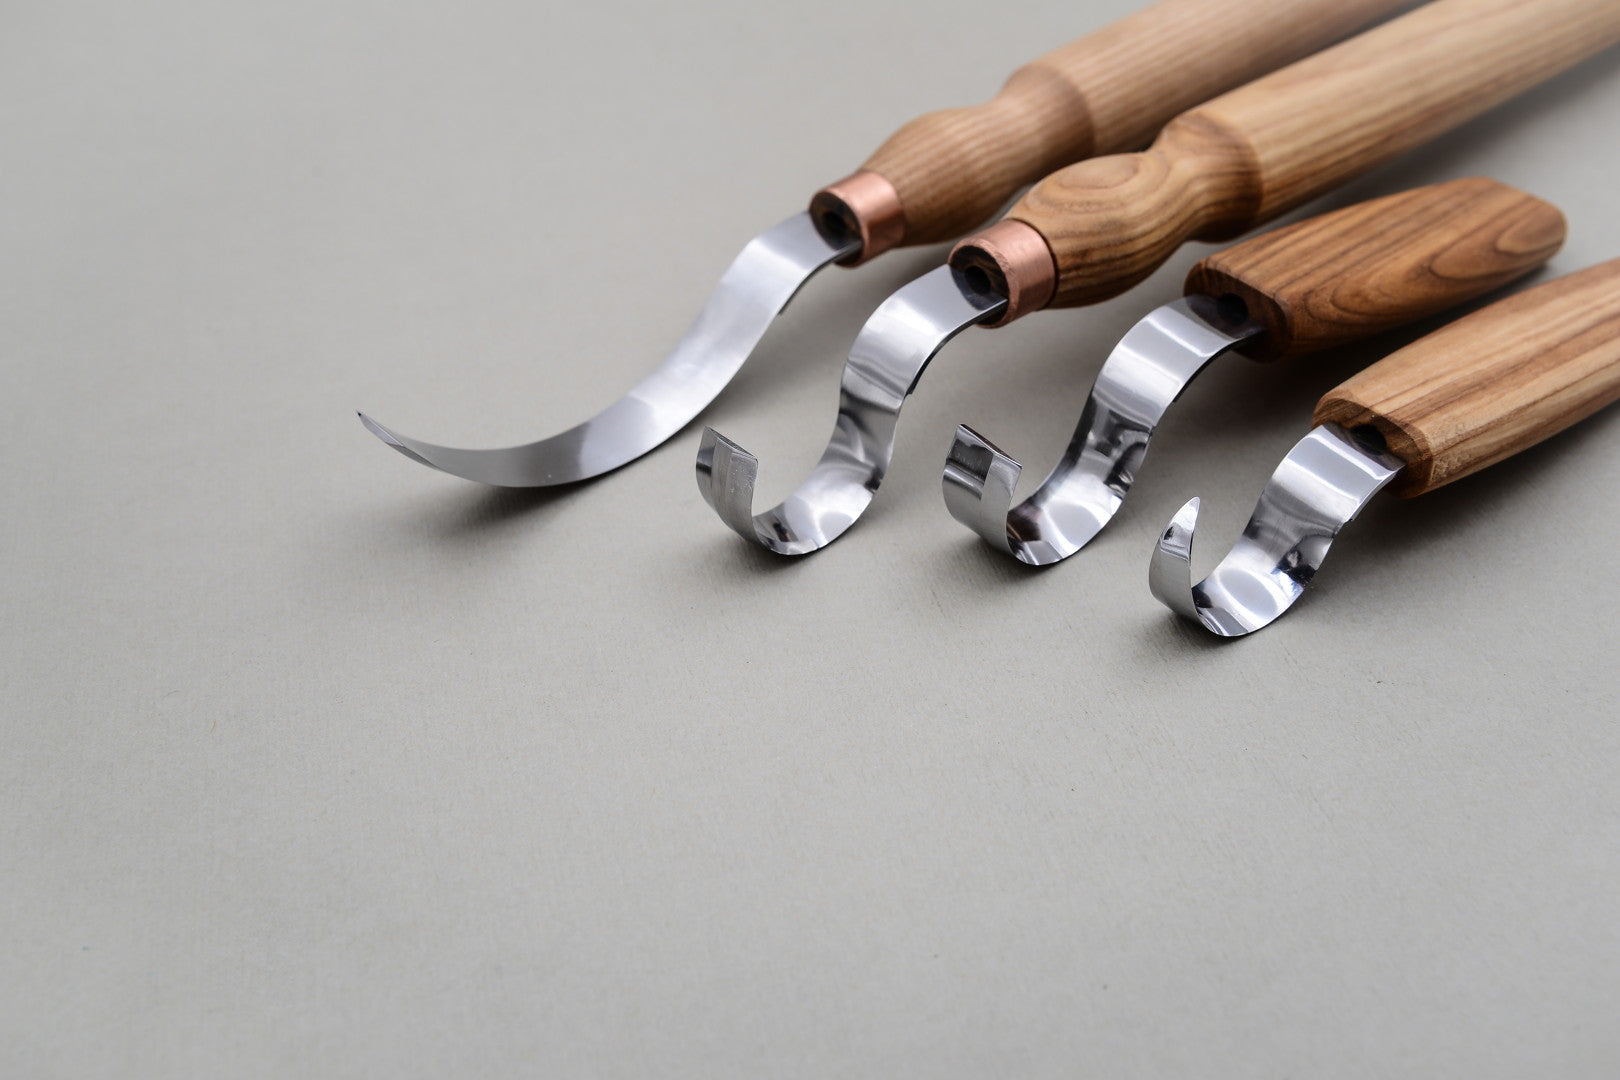 Left-Handed Cutlery, Kitchen Knives for Southpaw Cooks